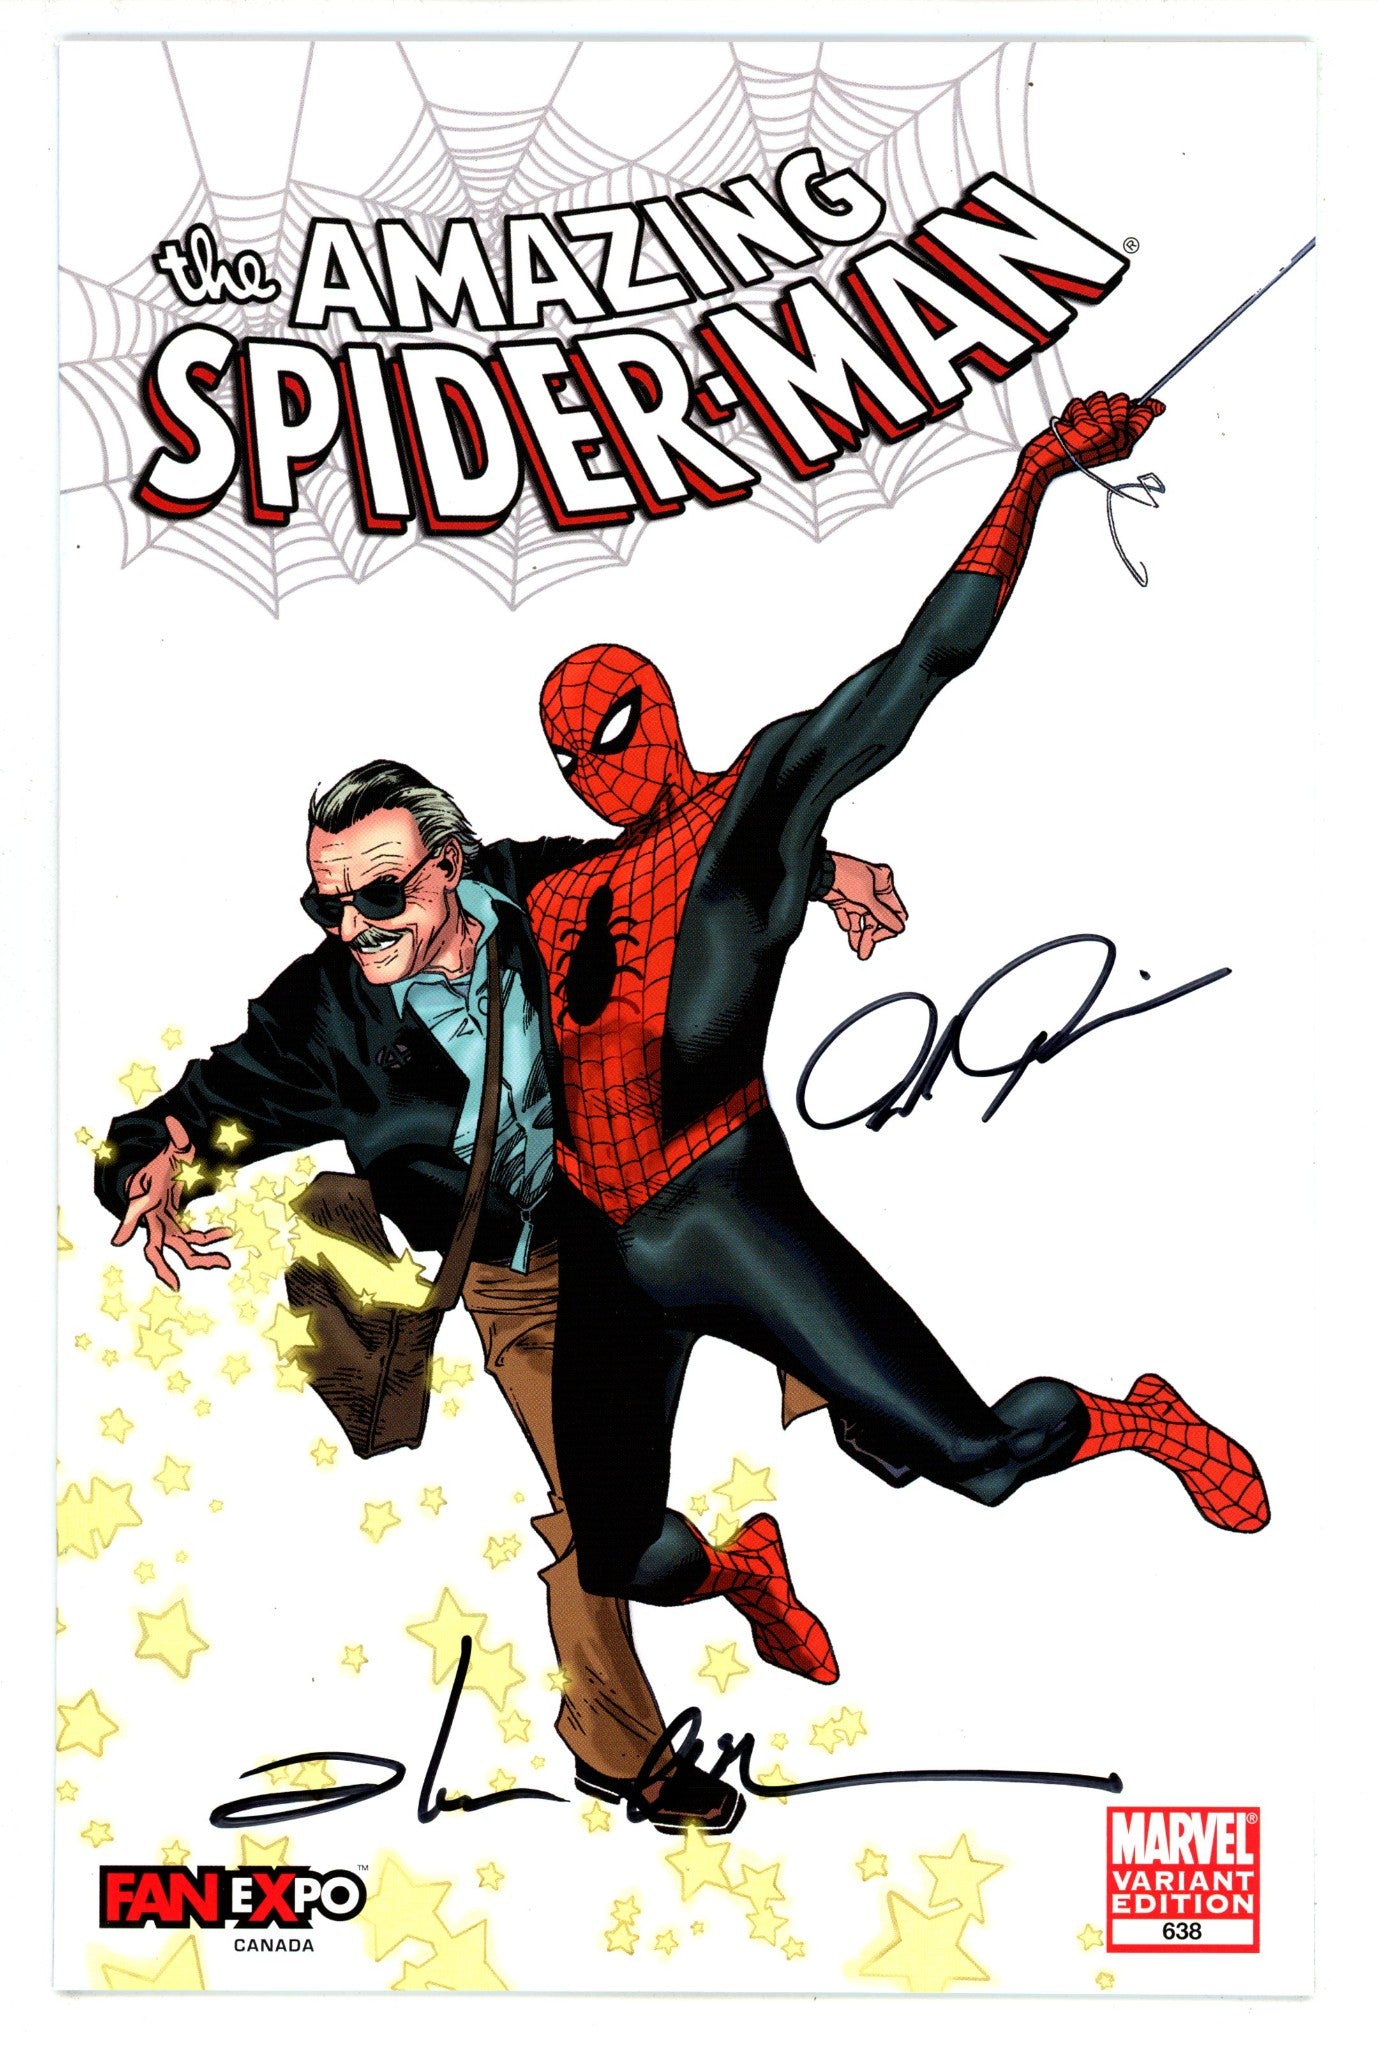 The Amazing Spider-Man Vol 2 638 NM- (9.2) (2010) Coipel Convention Variant Signed x2 Cover Stuart Immonen 